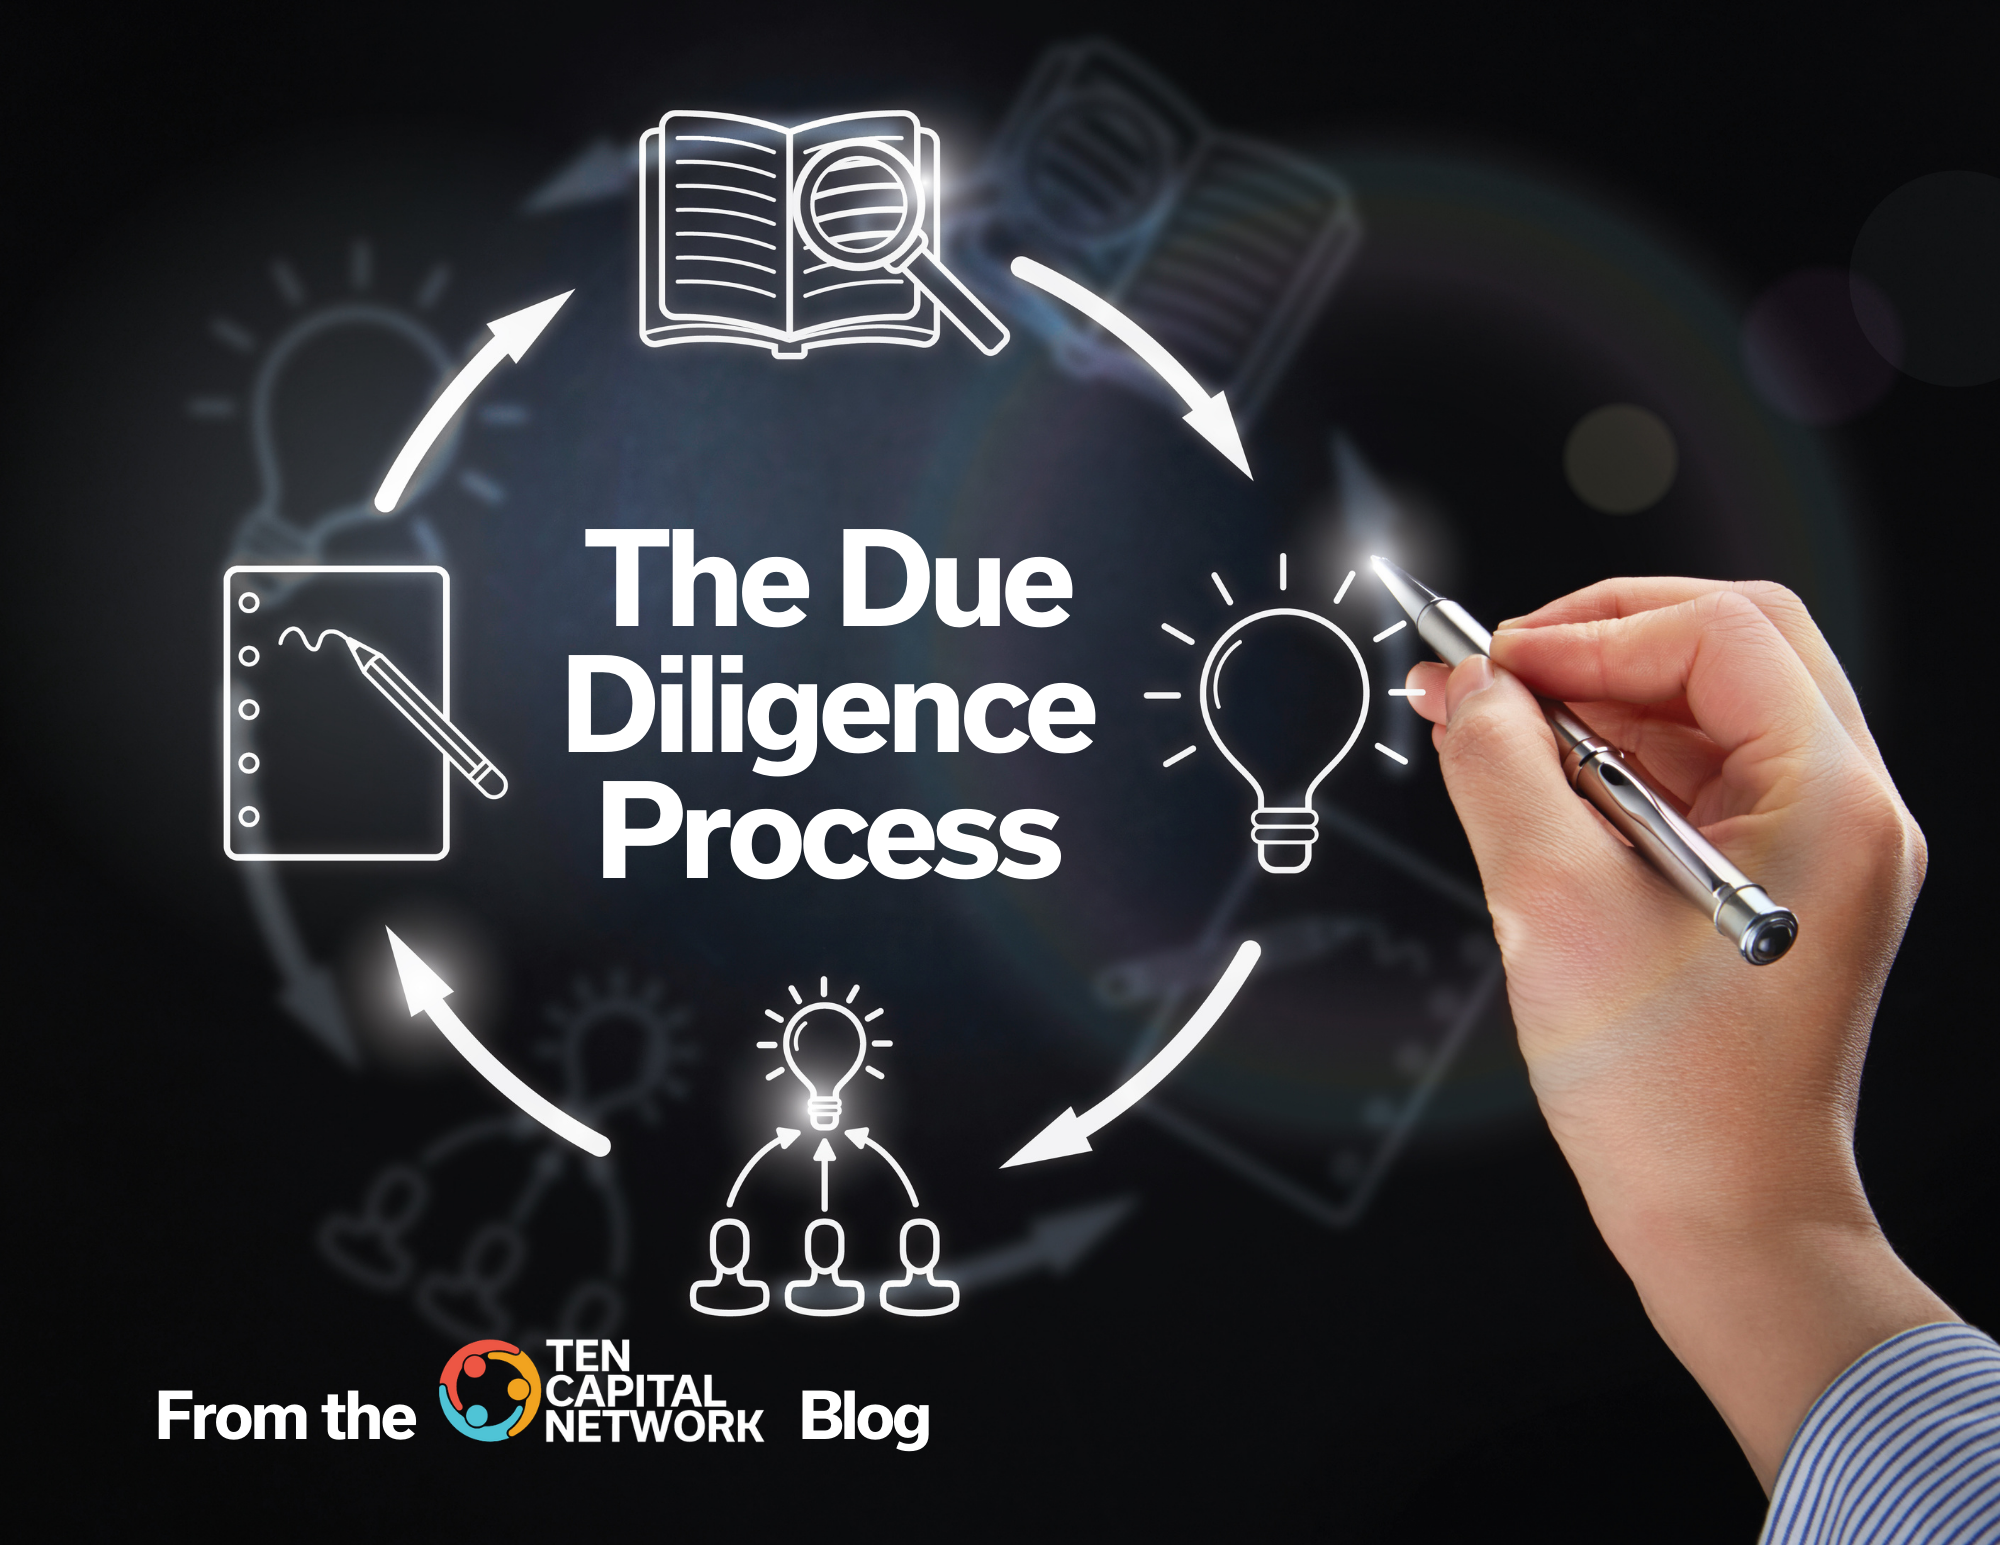 The Due Diligence Process